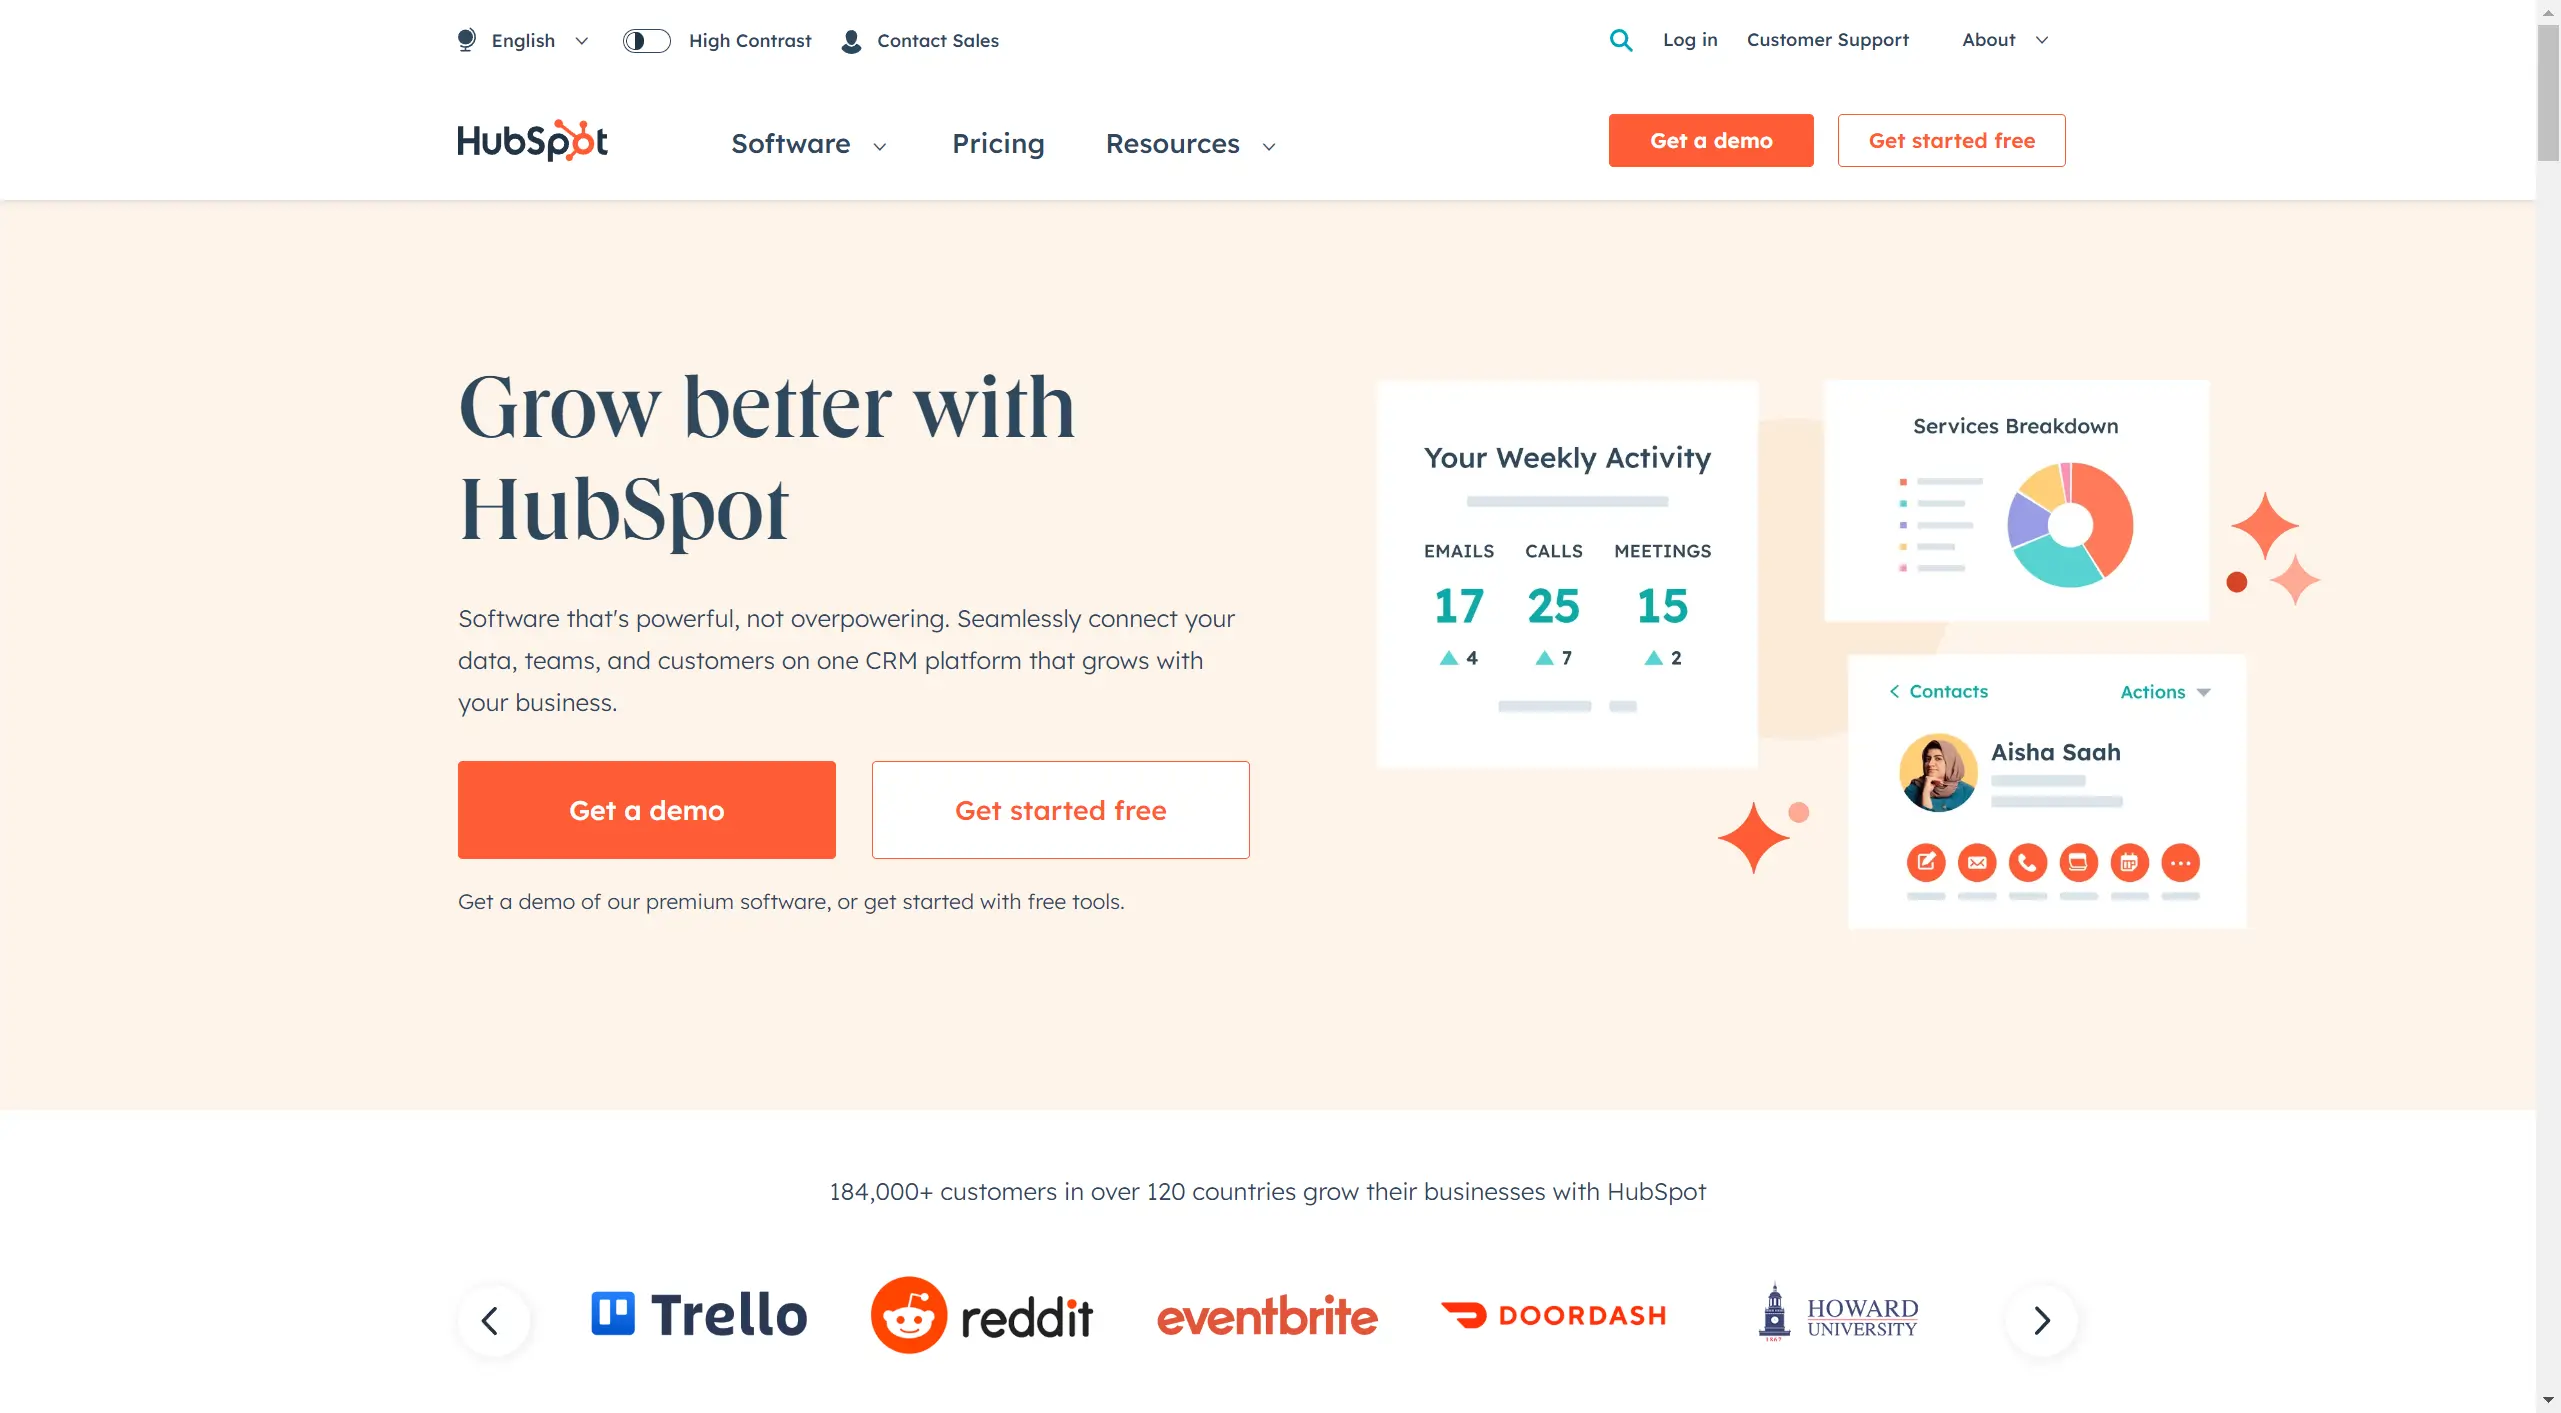 HubSpot's landing page that shows all the features it offers with text and data  visuals